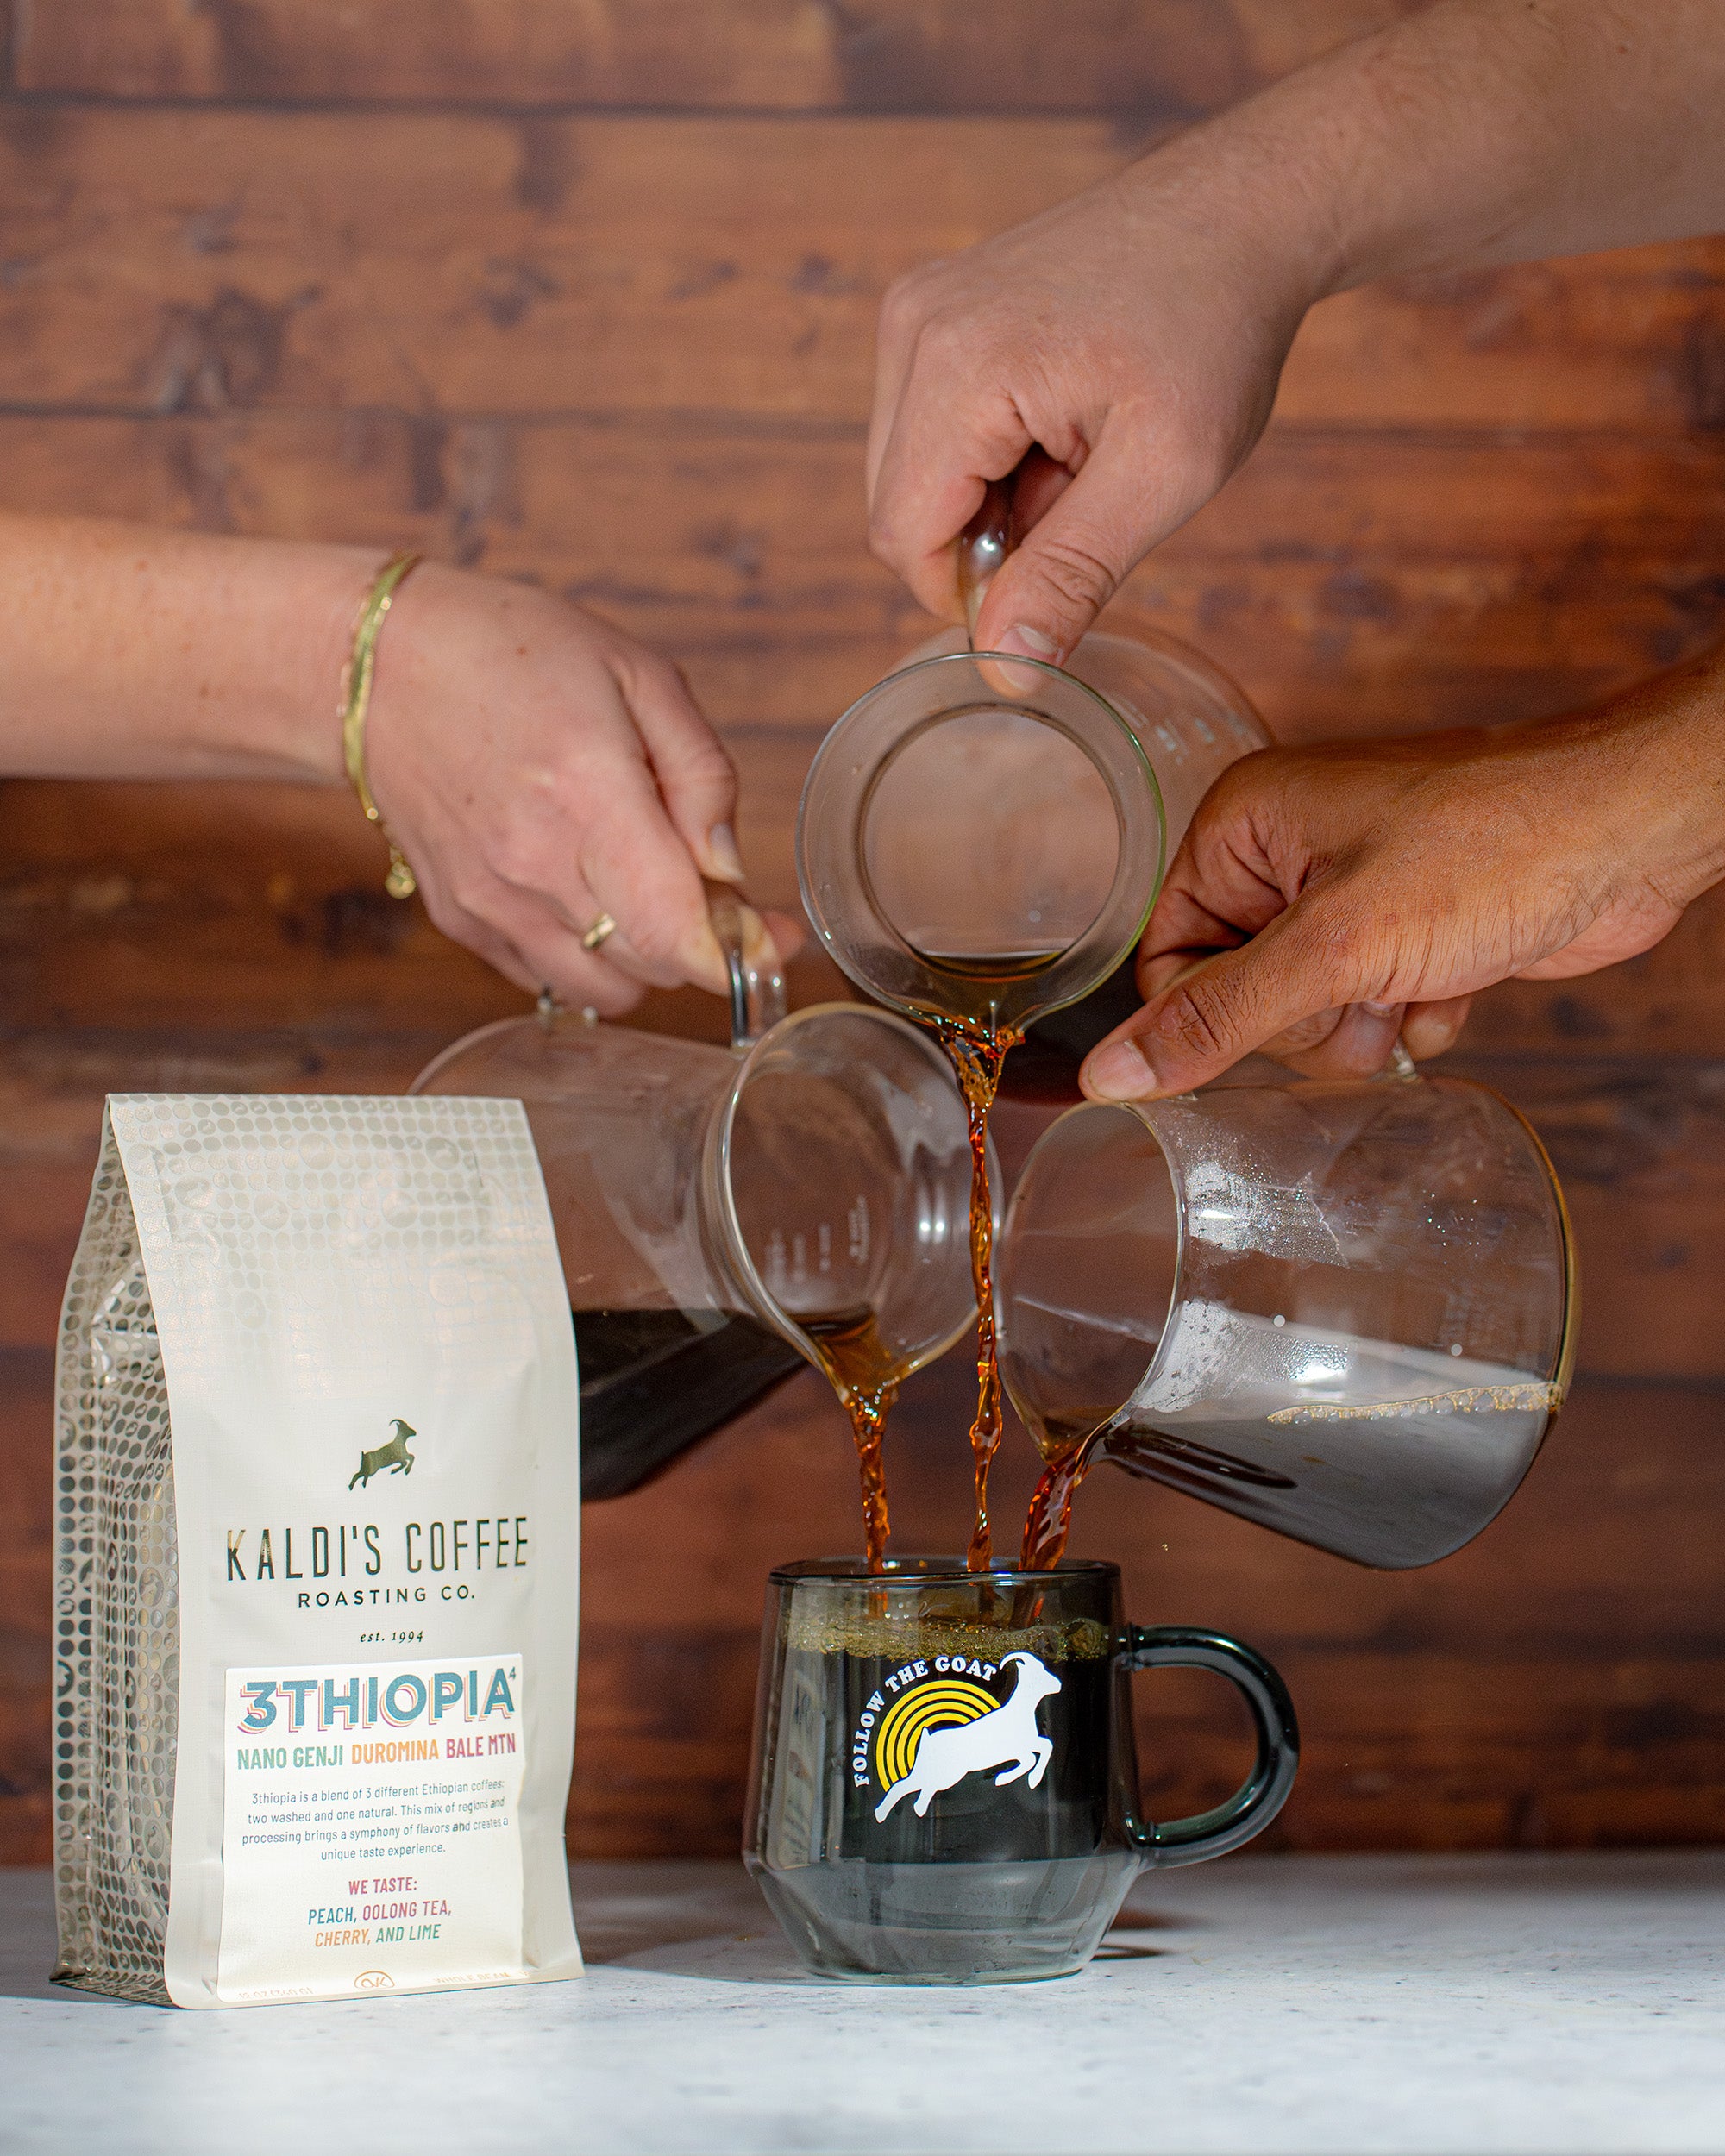 3 people pour coffee from carafes into a Kaldi's mug beside a bag of 3thiopia